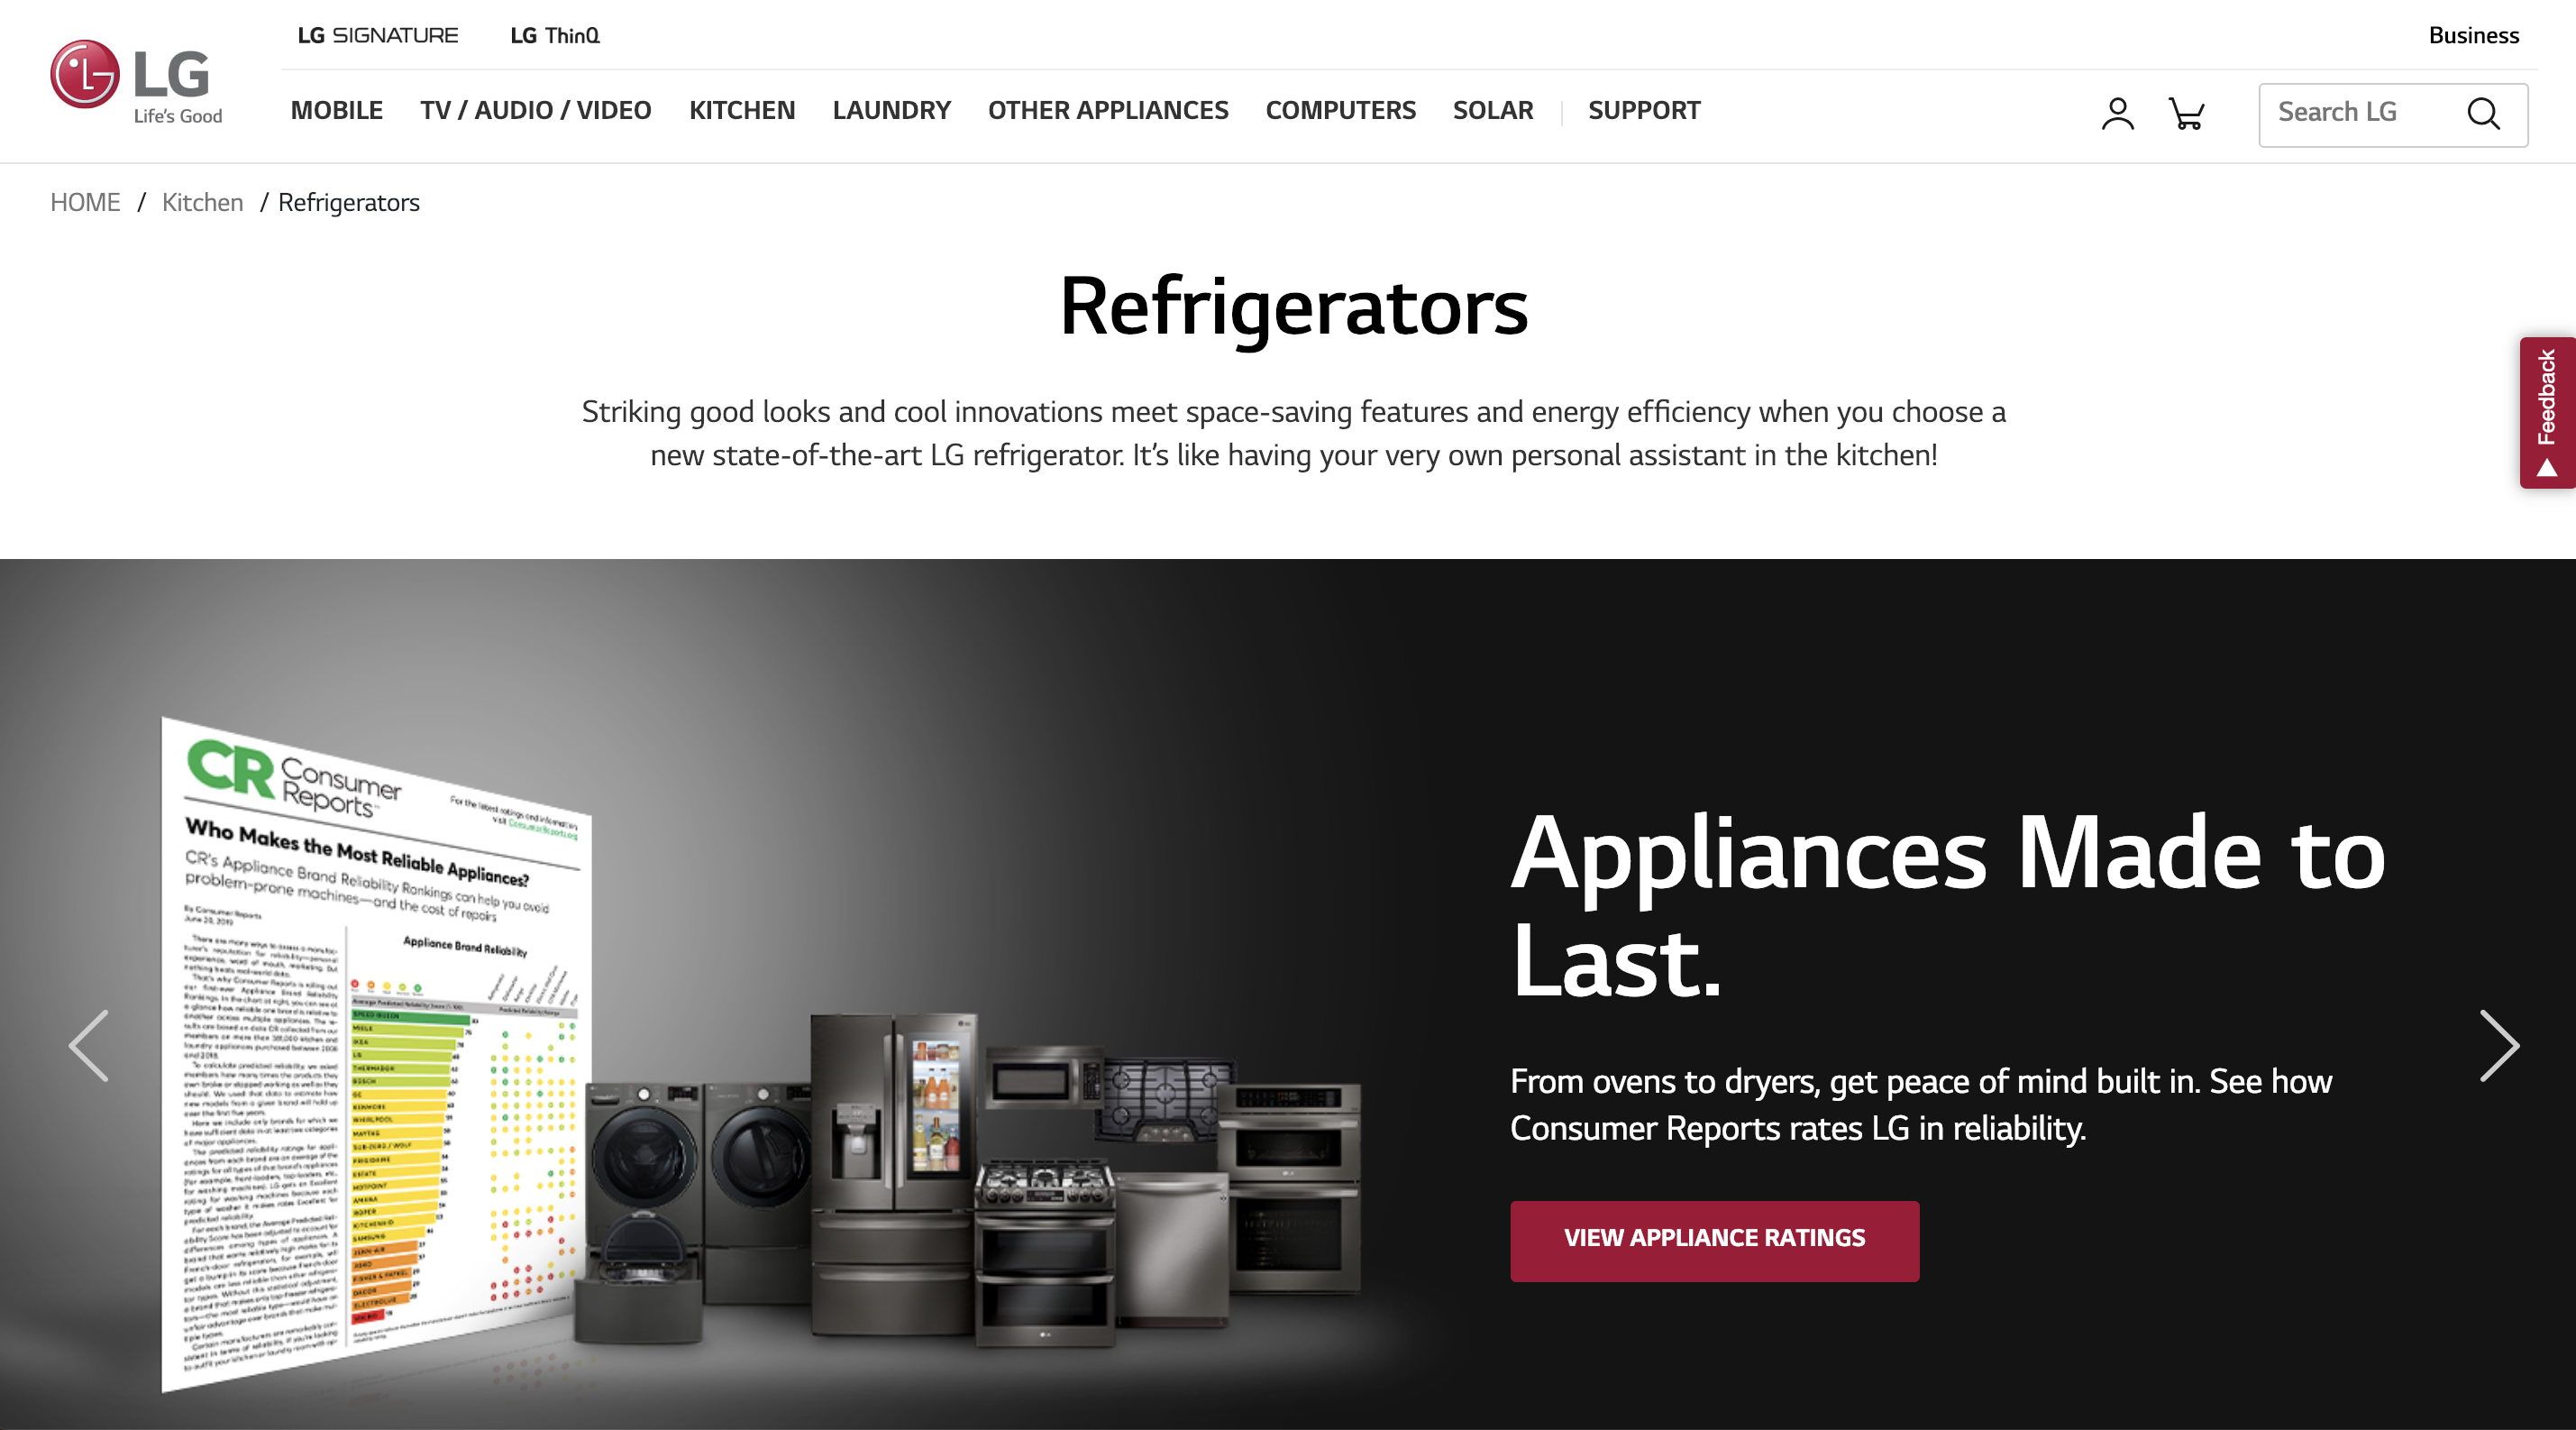 LG-refrigerators-category-page-appliance-ratings-hero